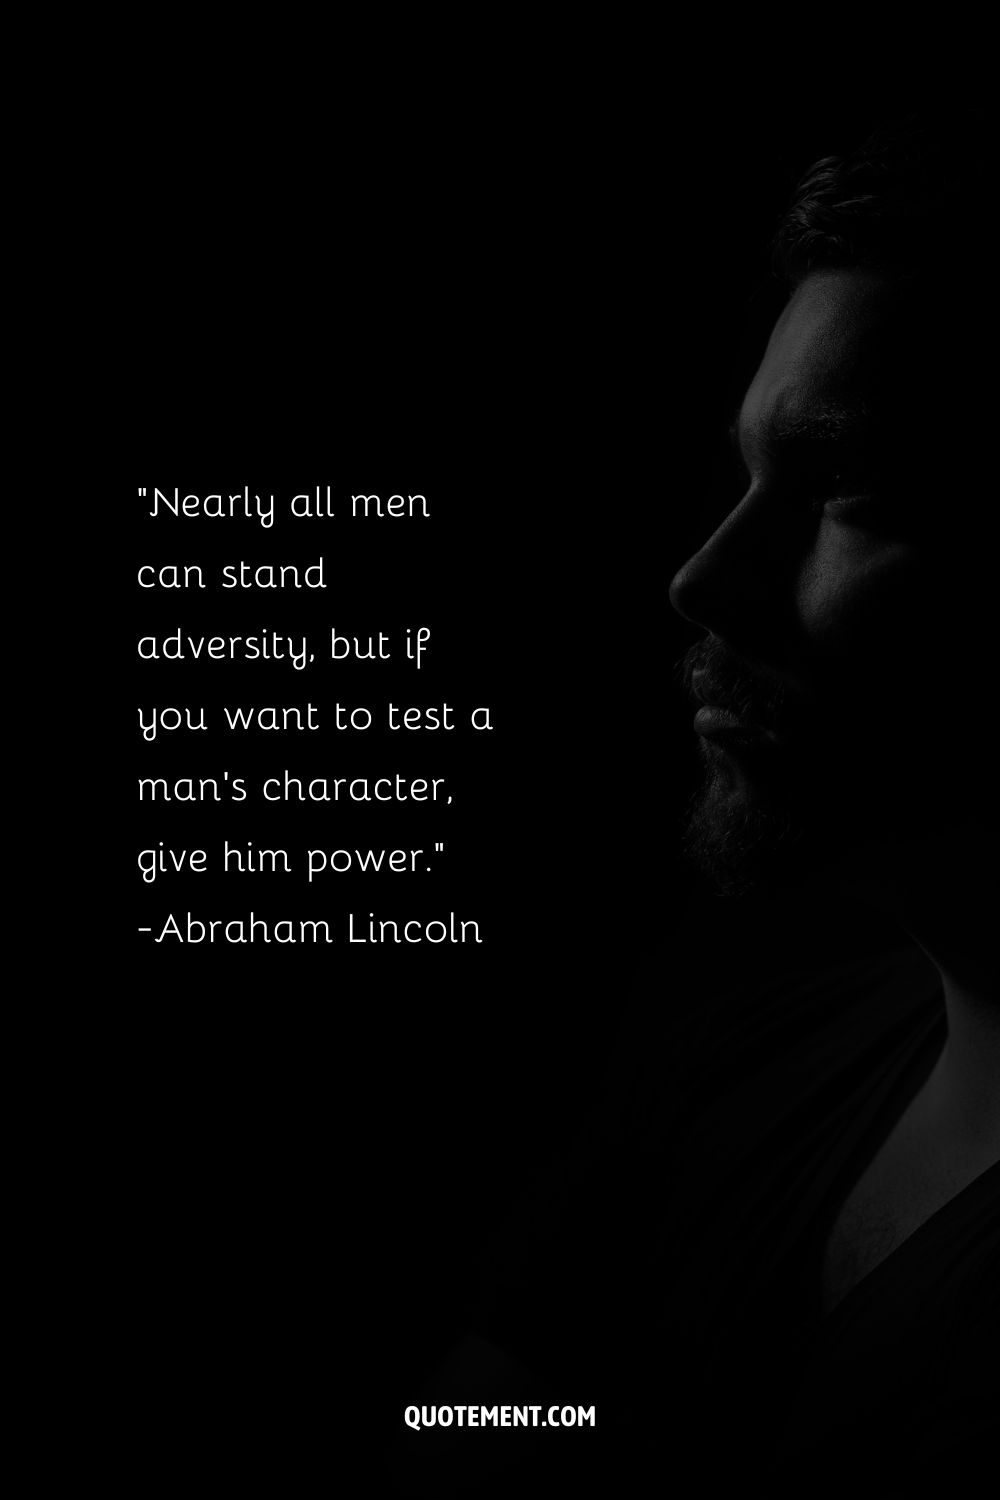 Nearly all men can stand adversity, but if you want to test a man’s character, give him power